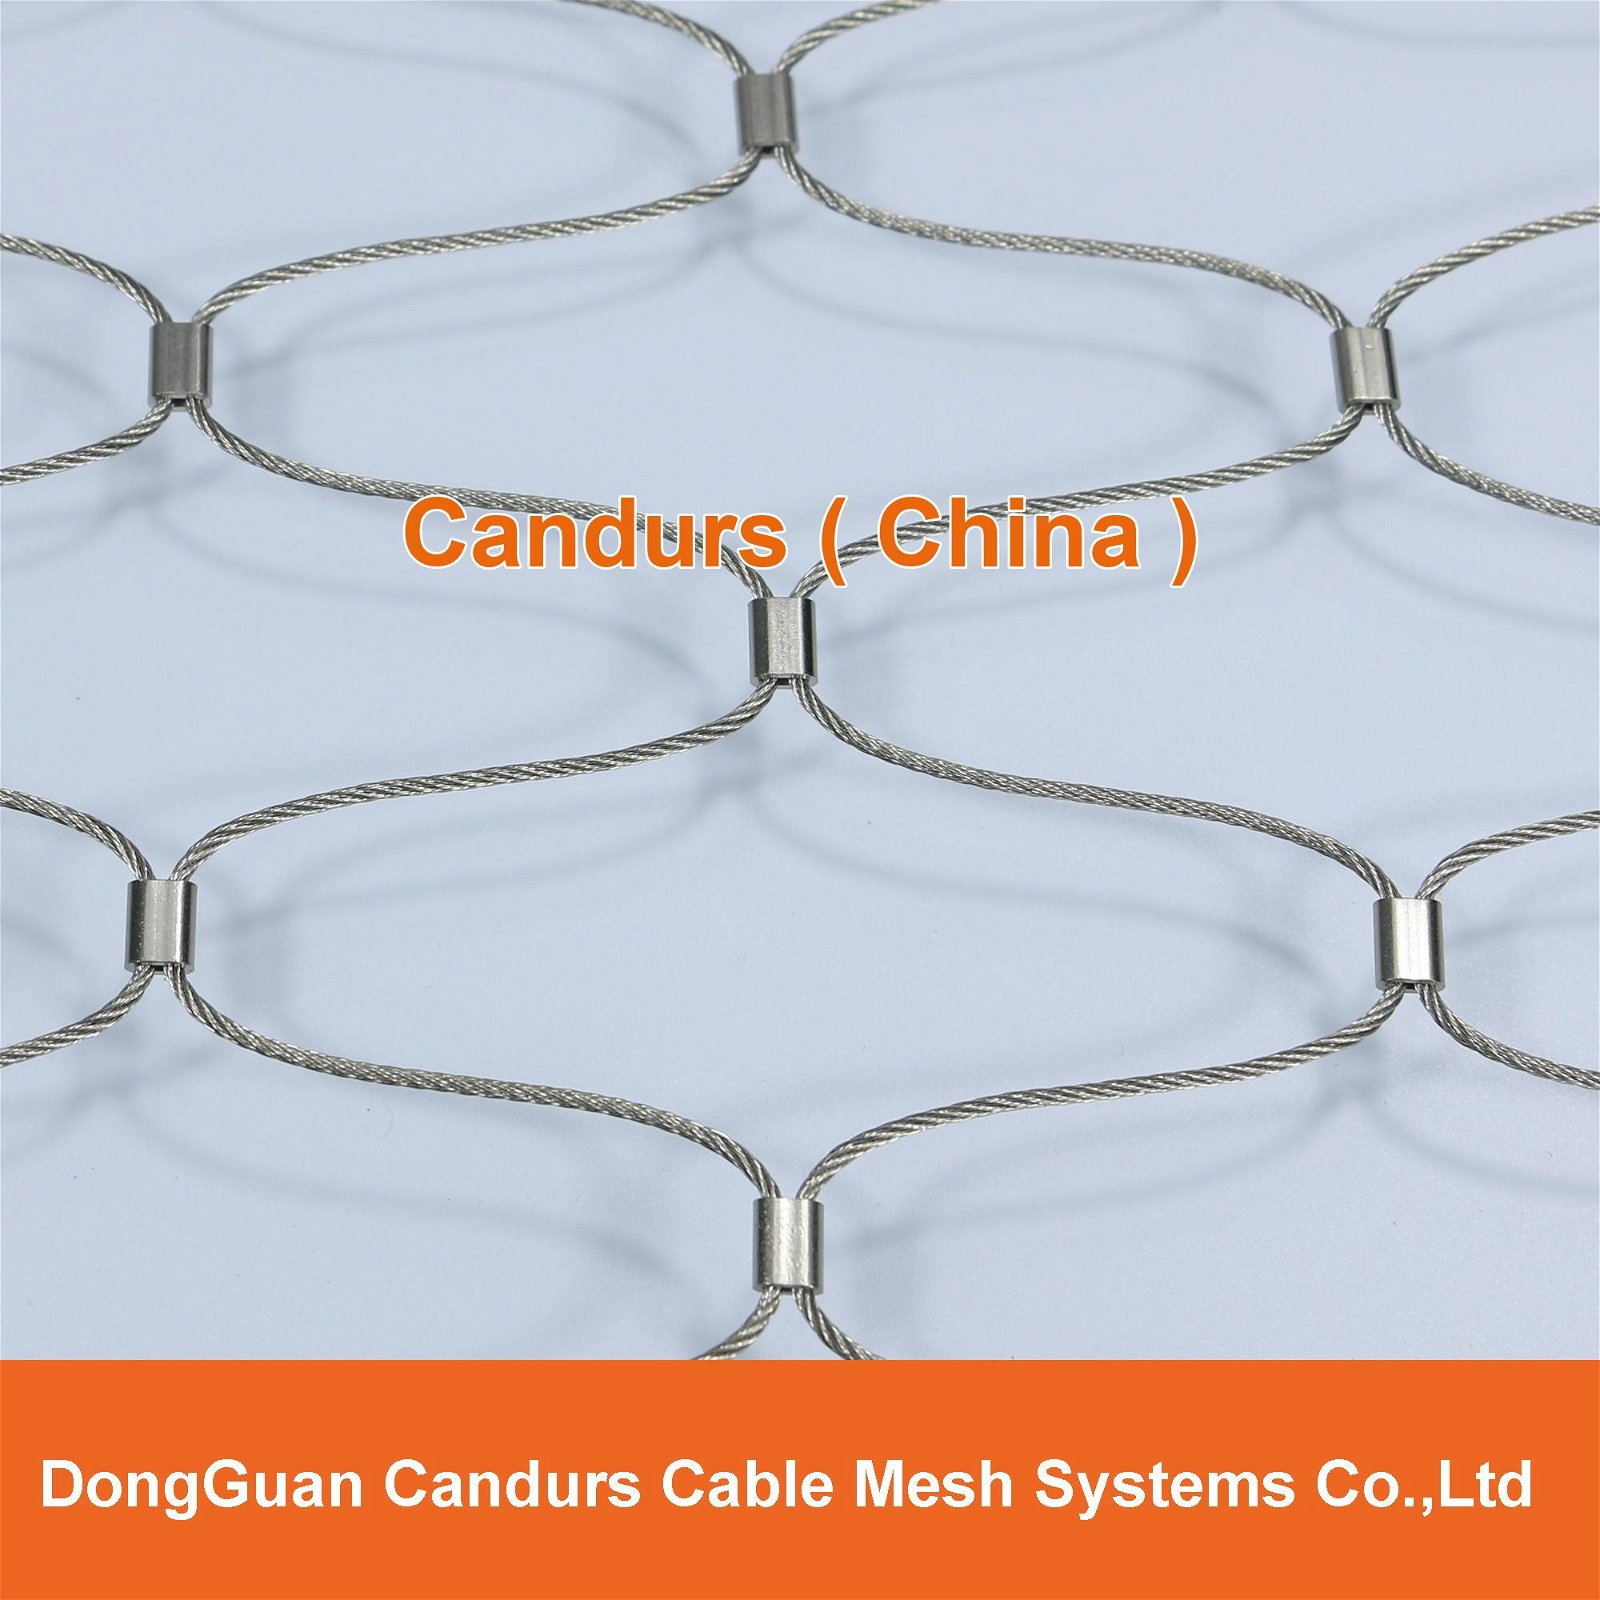 3 mm 120 mm x 210 mm AISI 316 Flexible Inox Cable Mesh Netting 6